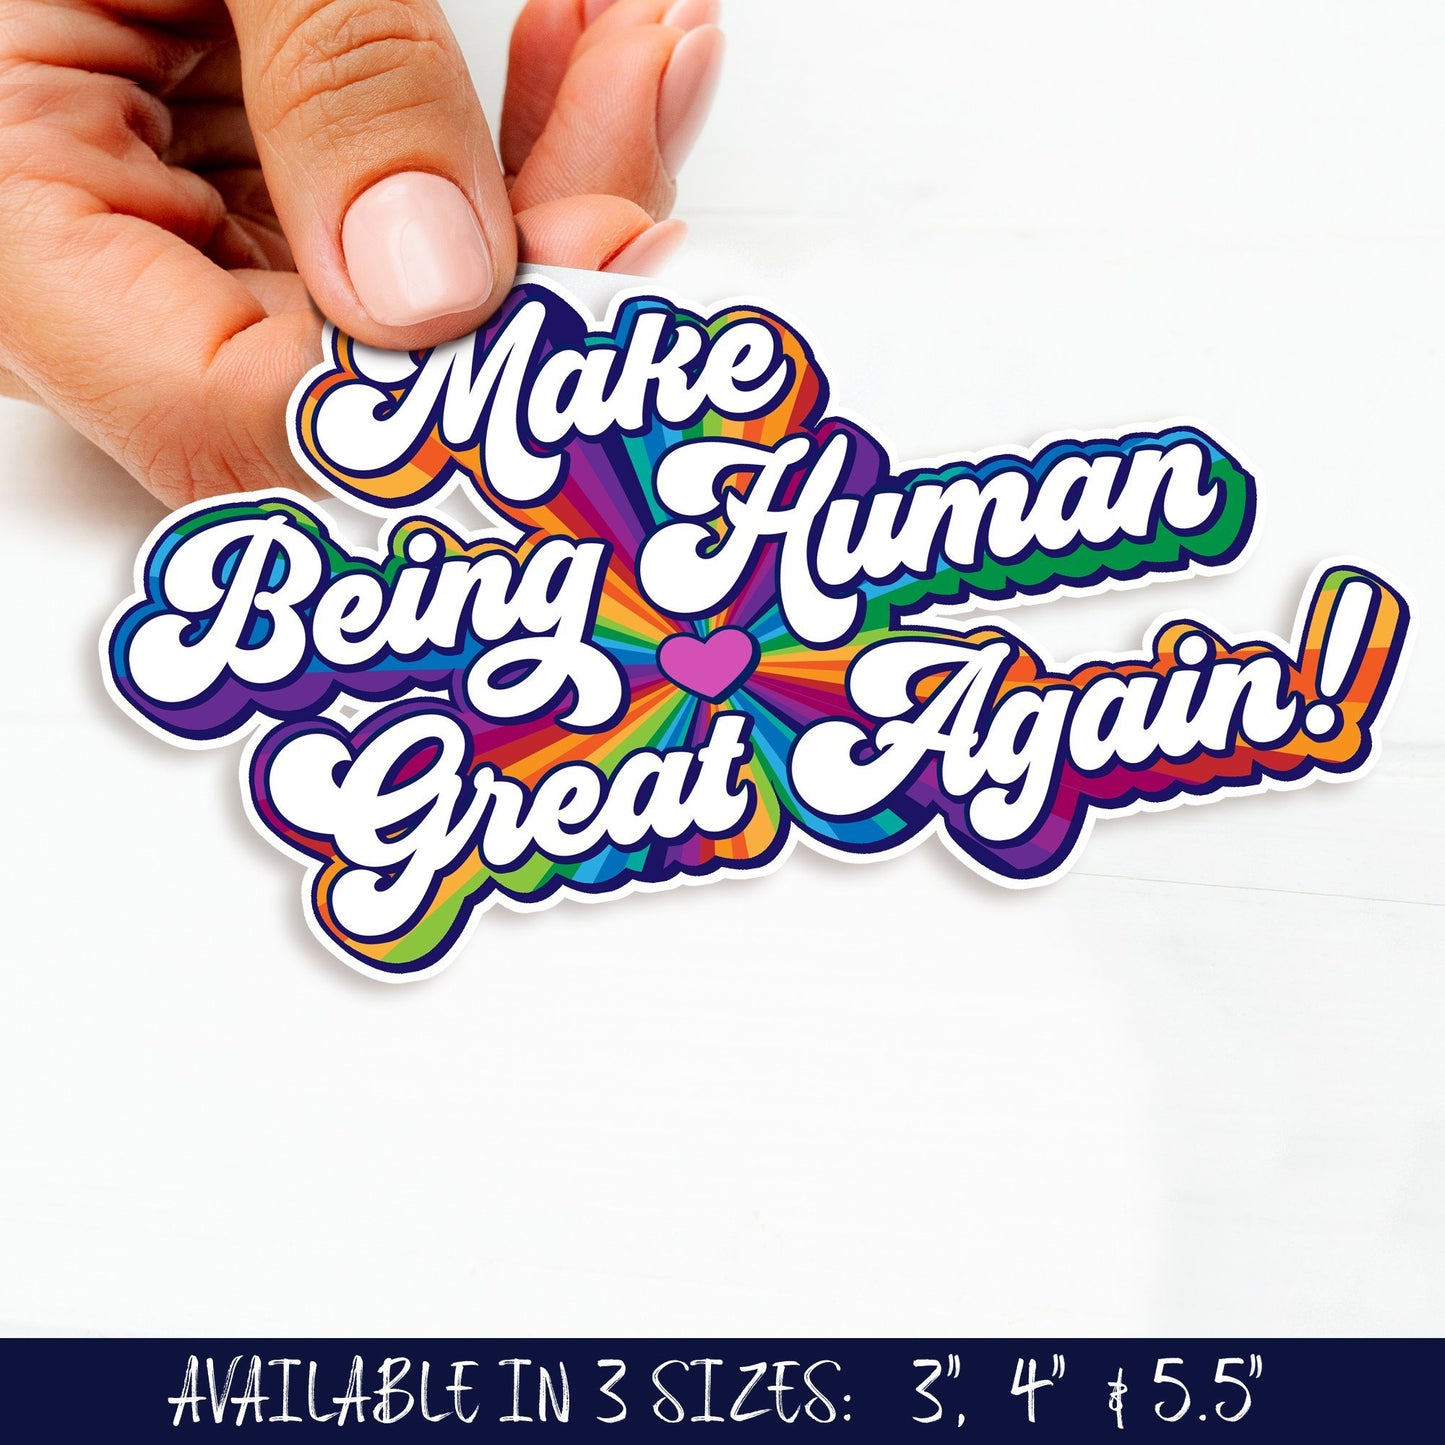 Make Being Human Great Again Sticker